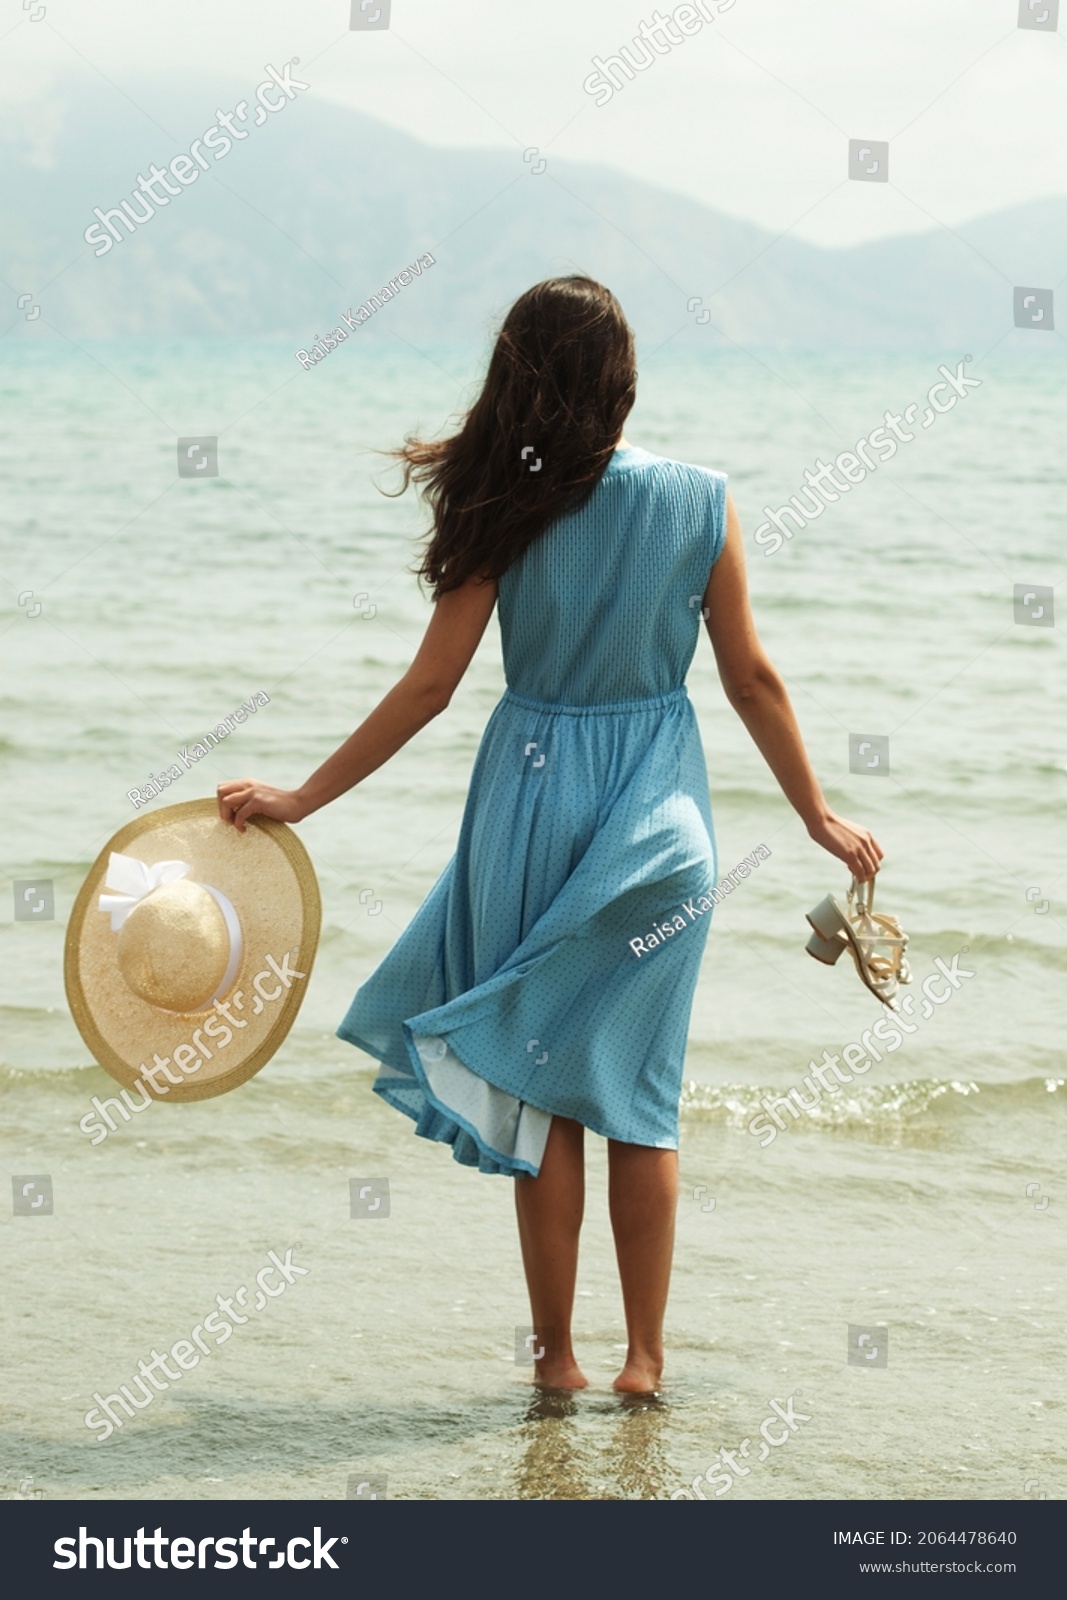 Image of a young brunette woman in a blue dress walking barefoot on a beach and dangles his feet in the water. Young woman in summer white dress with straw hat looking to a sky and sea. Back view. #2064478640